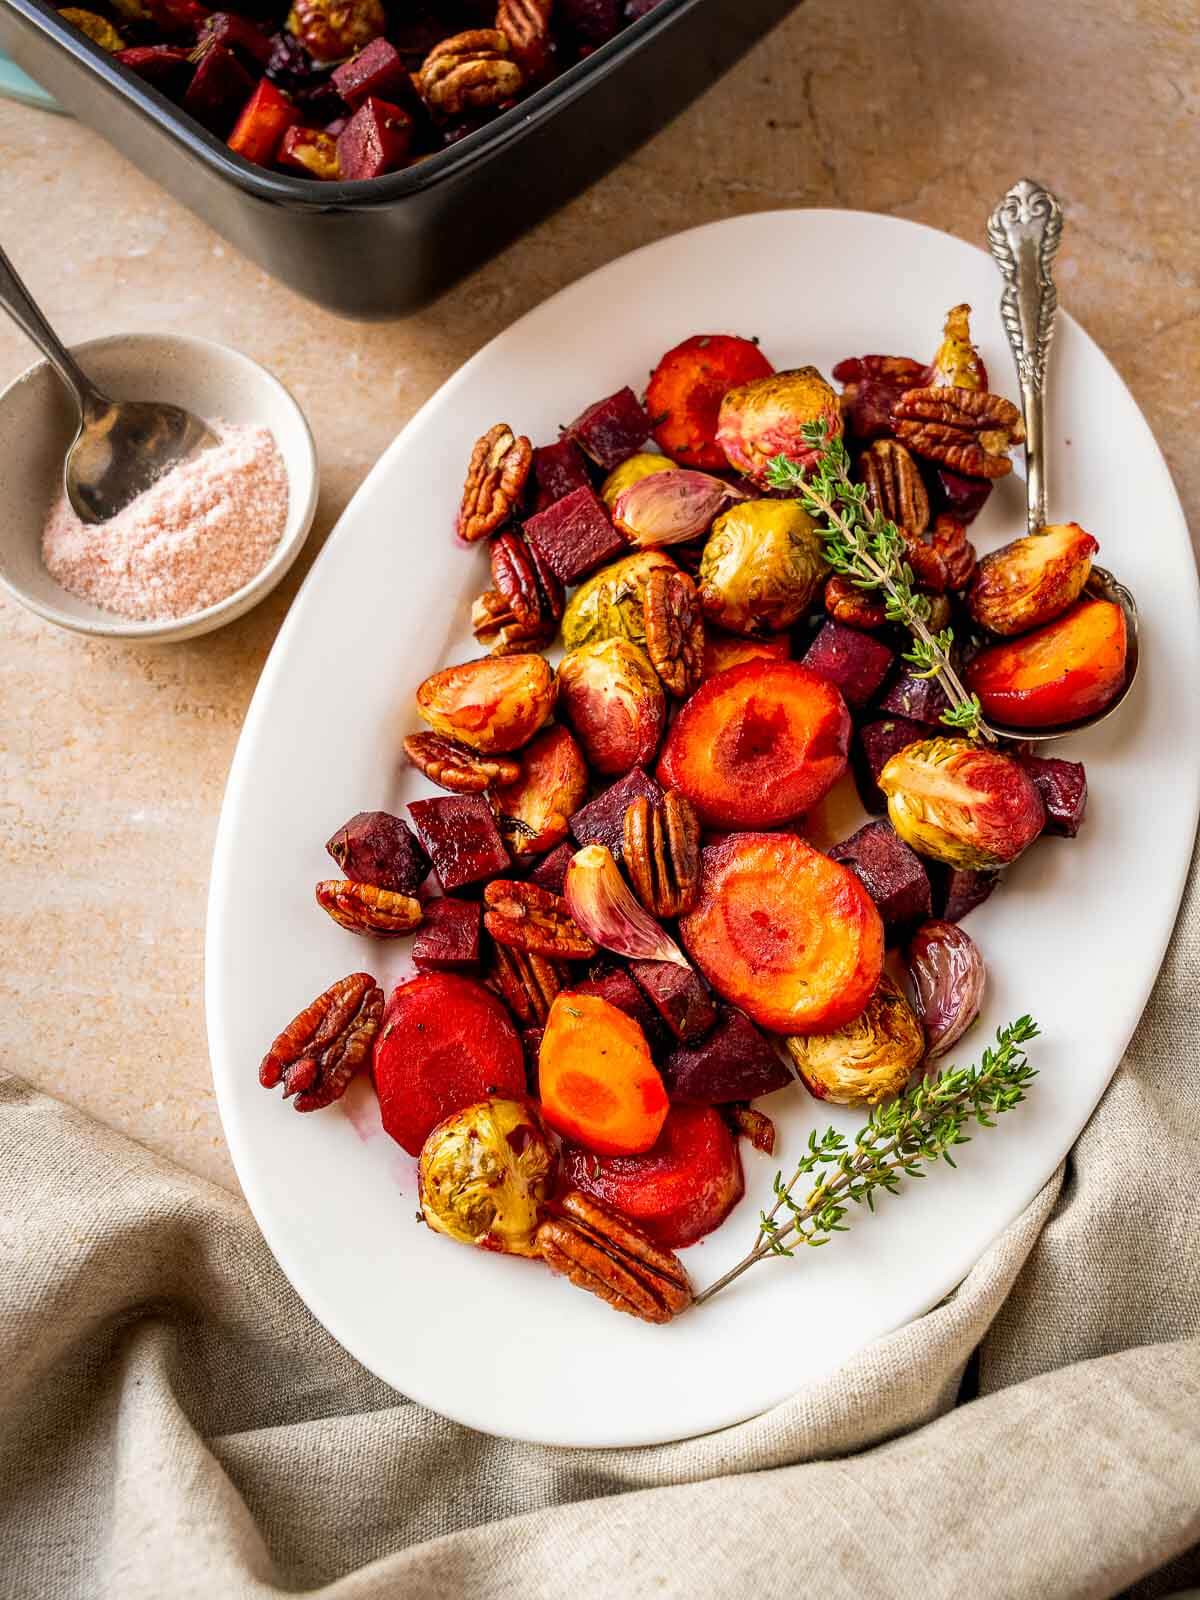 Honey Roasted Vegetables with Brussels Sprouts and Carrots served on a Holiday table.